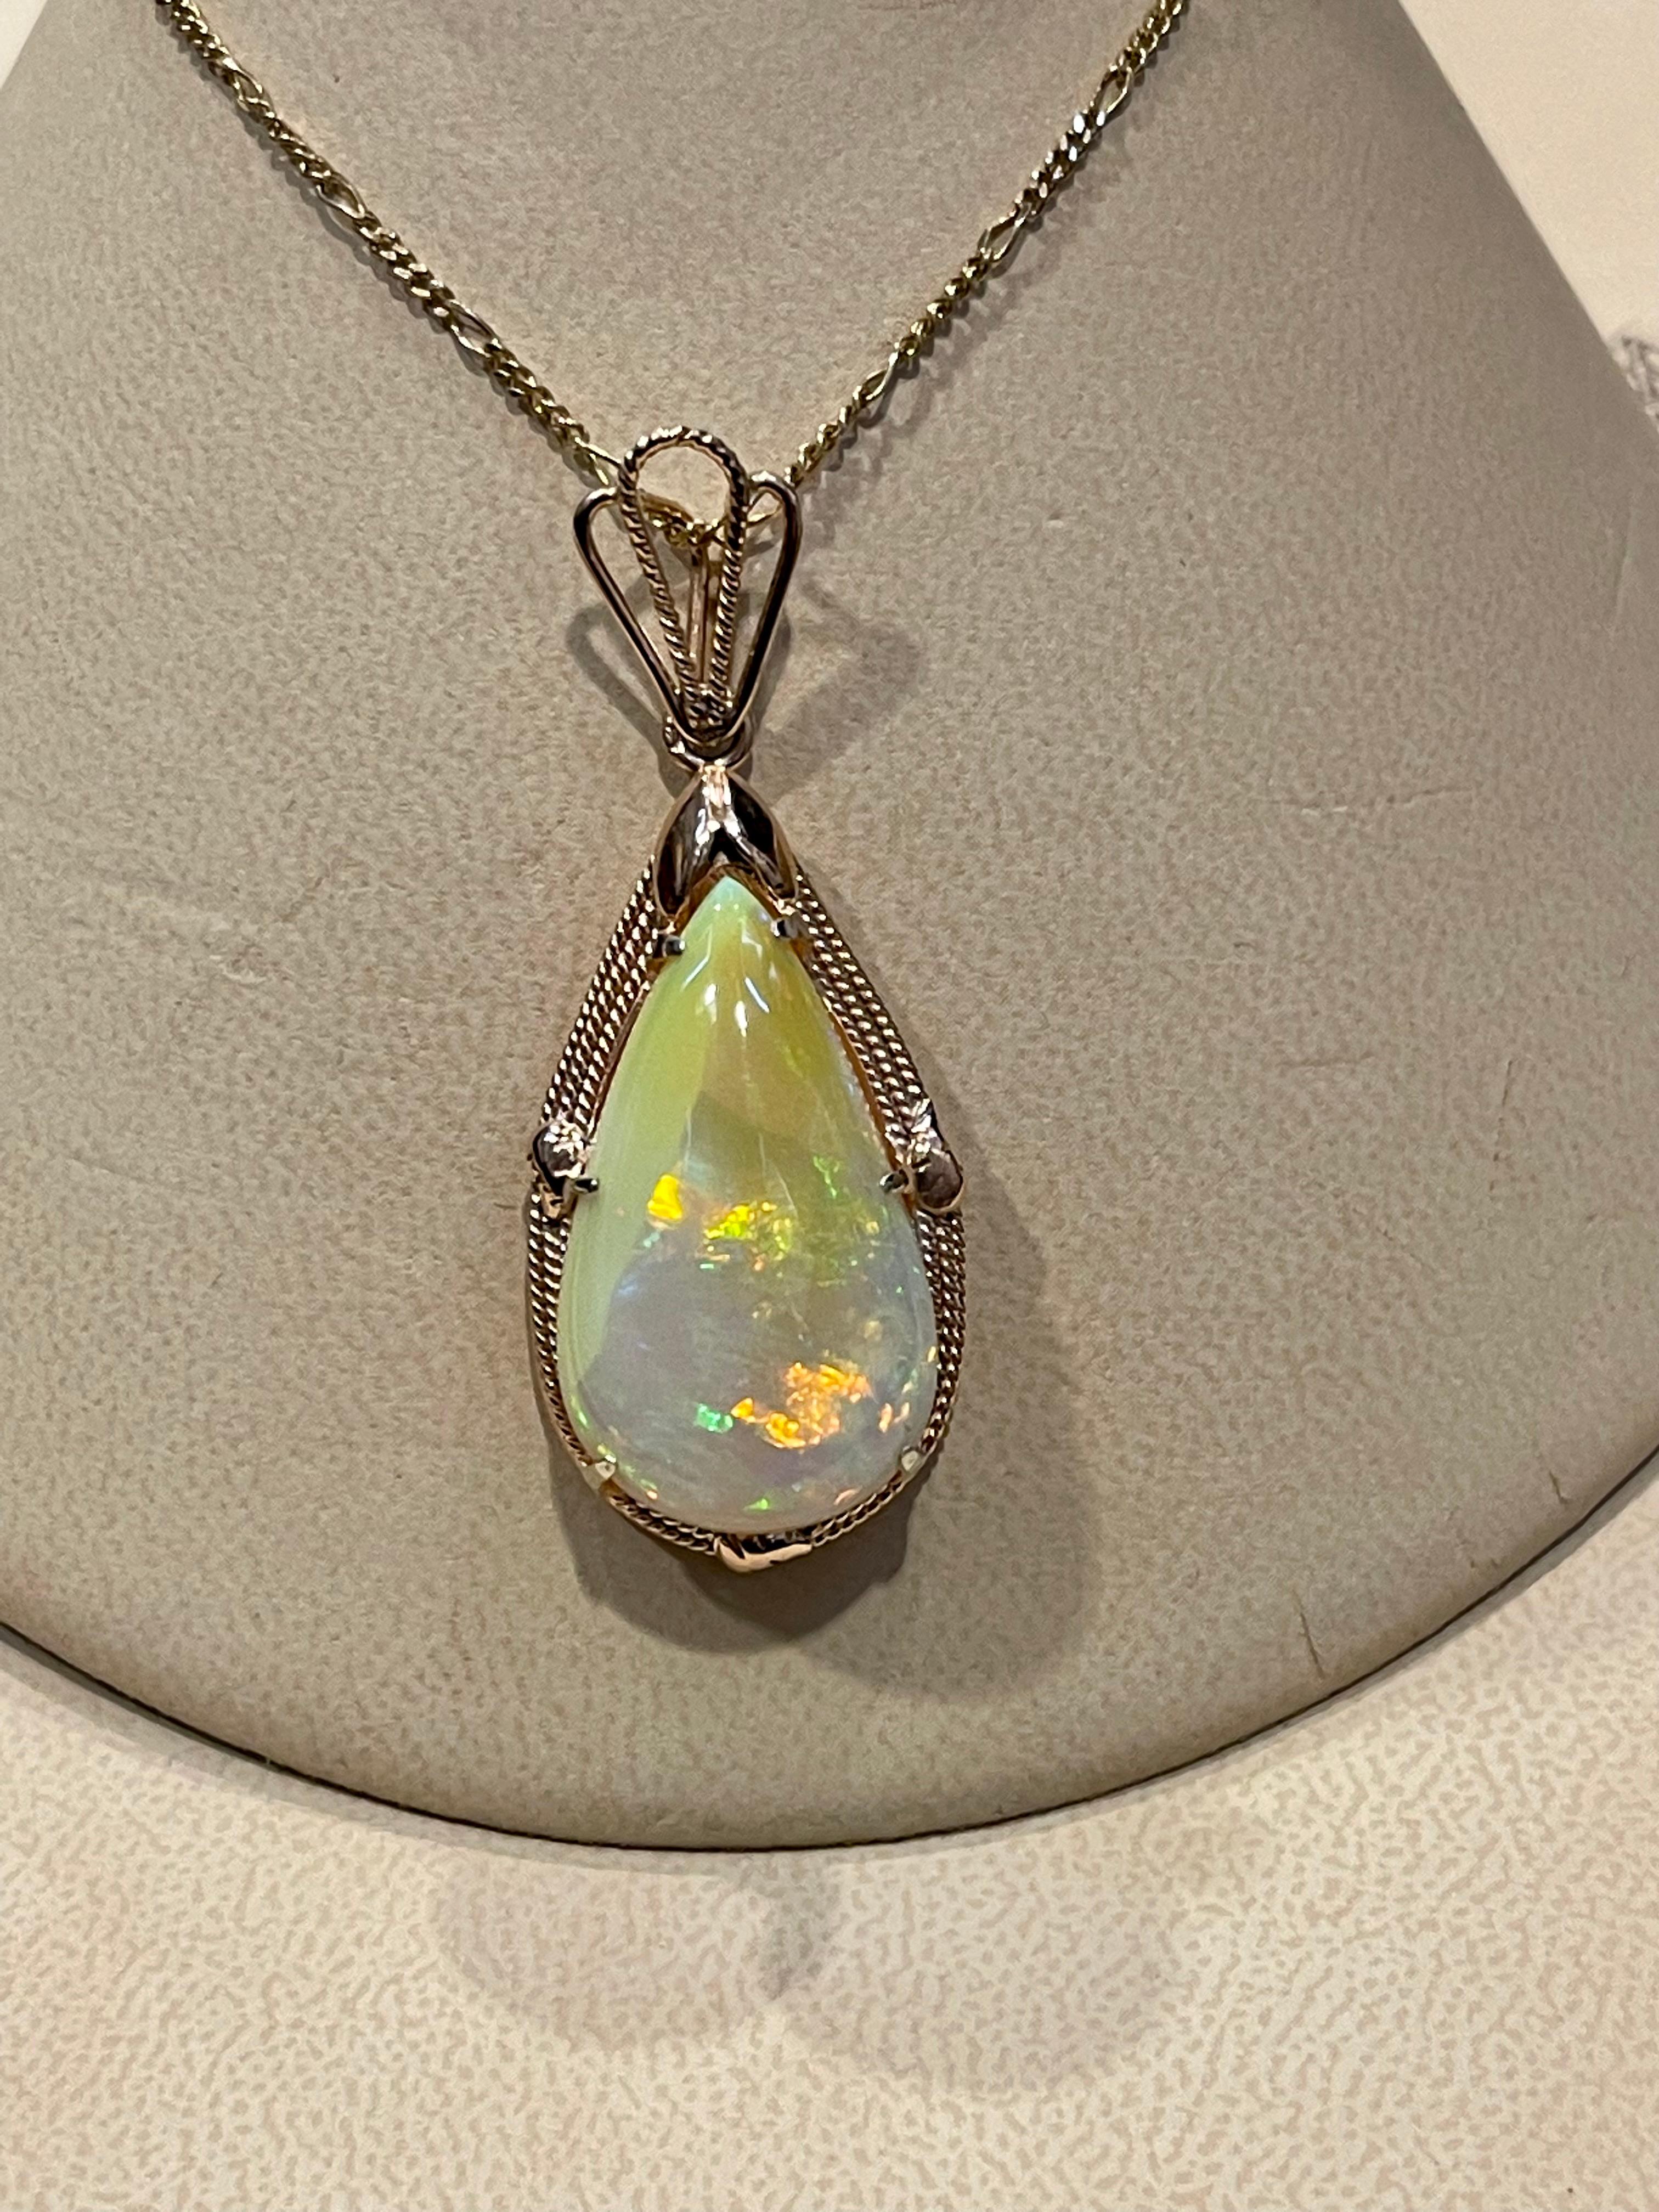 20 Carat Pear Ethiopian Opal  Pendant / Necklace 18 Karat Yellow Gold Estate In Excellent Condition For Sale In New York, NY